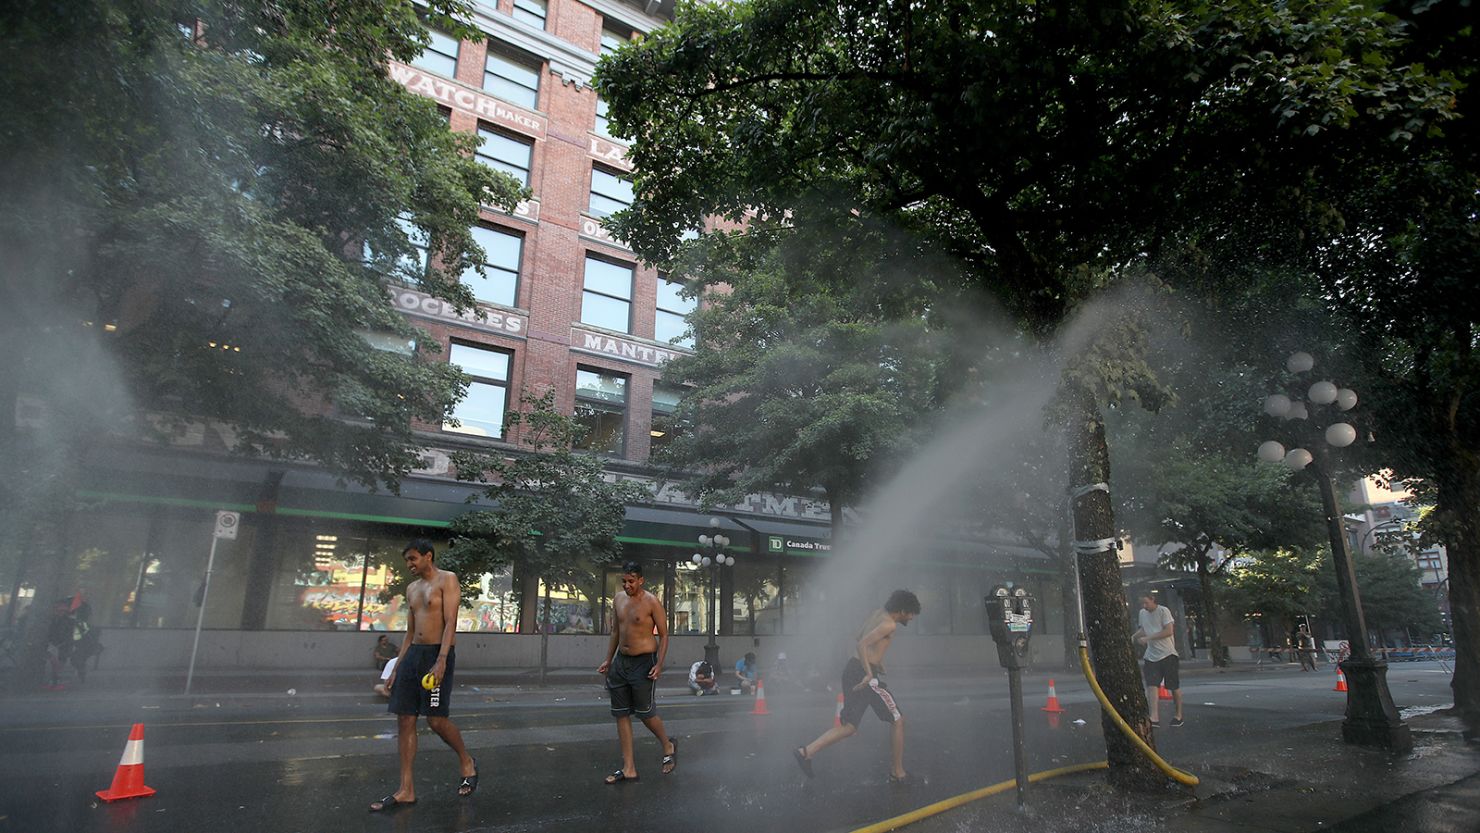 A temporary misting station in Vancouver cools residents amid the extreme heat.